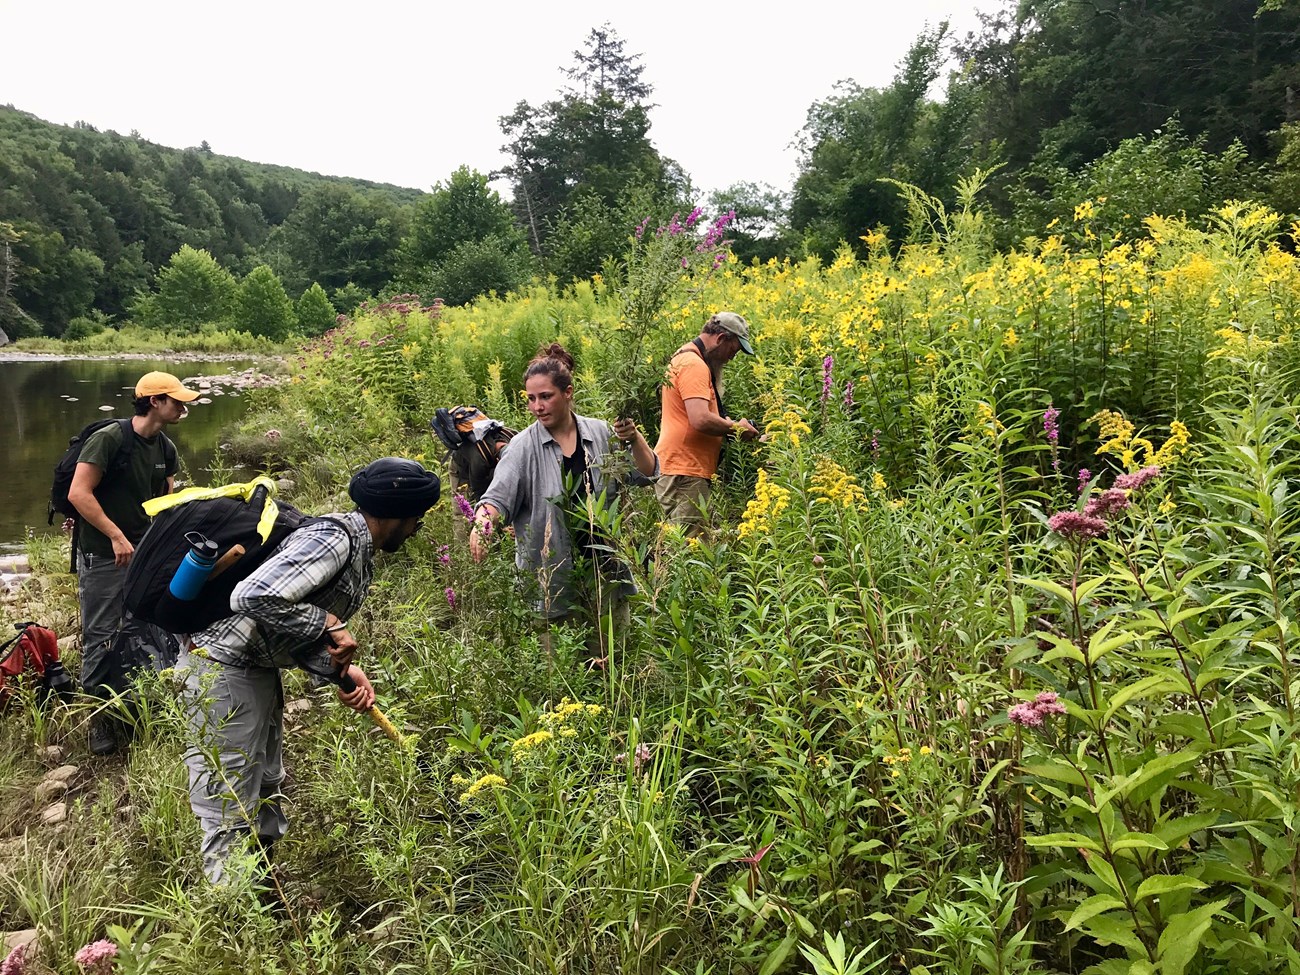 A group of people work to remove invasive plants on the banks of a river